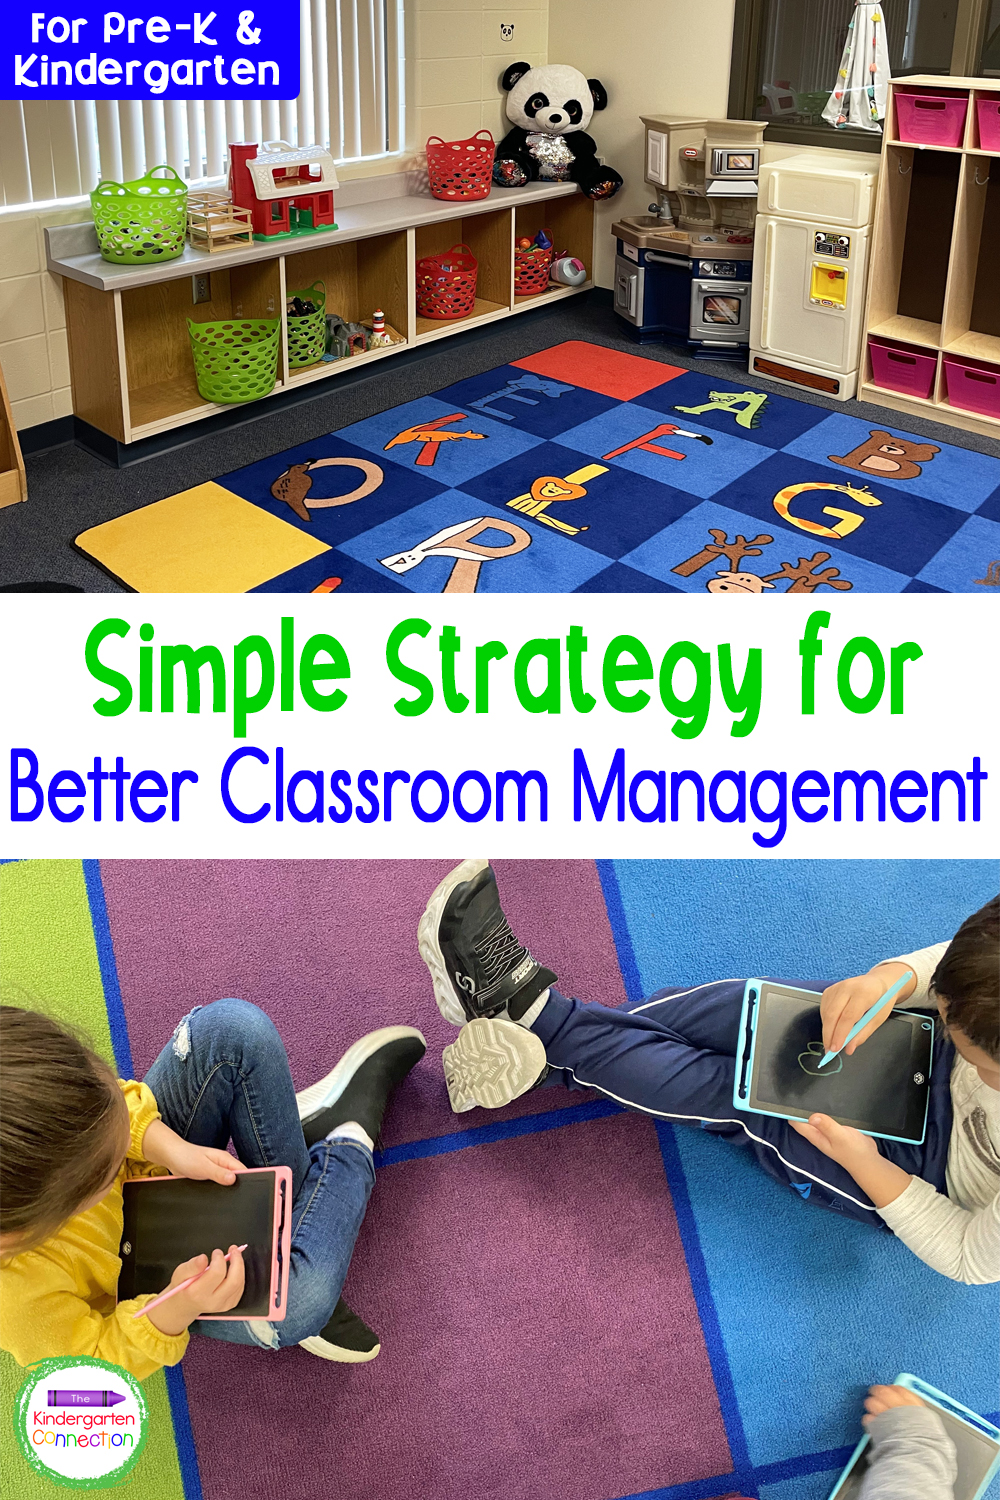 Try this simple strategy for improving classroom managment and you will notice a difference right away!